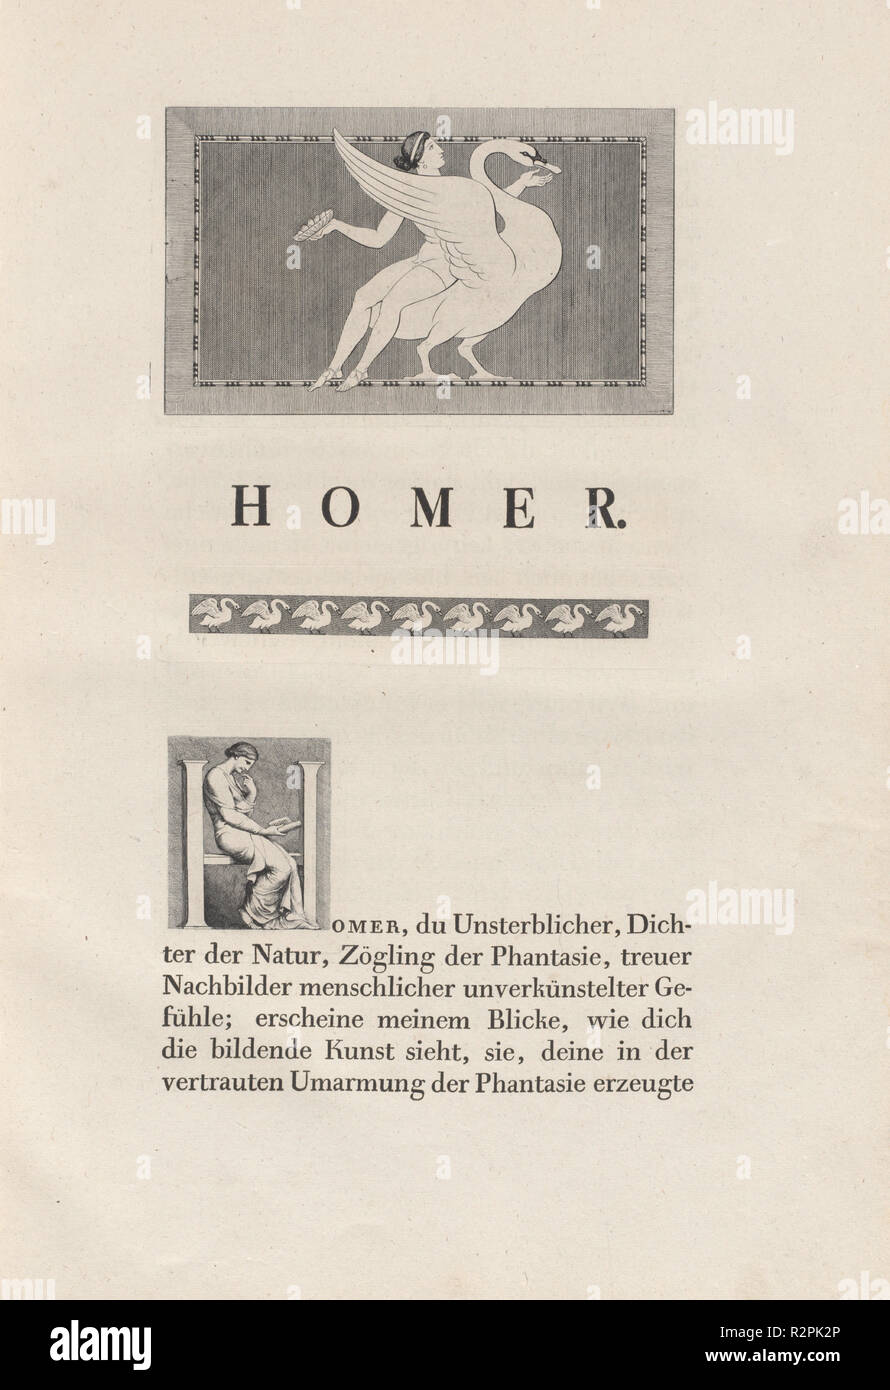 Homer Nach Antiken Gezeichnet. Dated: 1801. Dimensions: book: 52 × 36.5 × 3.7 cm (20 1/2 × 14 3/8 × 1 7/16 in.). Medium: bound volume with etched and engraved illustrations, including 8 initials, 19 head- or tailpieces and 37 plates. Museum: National Gallery of Art, Washington DC. Author: Johann Heinrich Wilhelm Tischbein for authors Homer and Christian Gottlob Heyne. Stock Photo